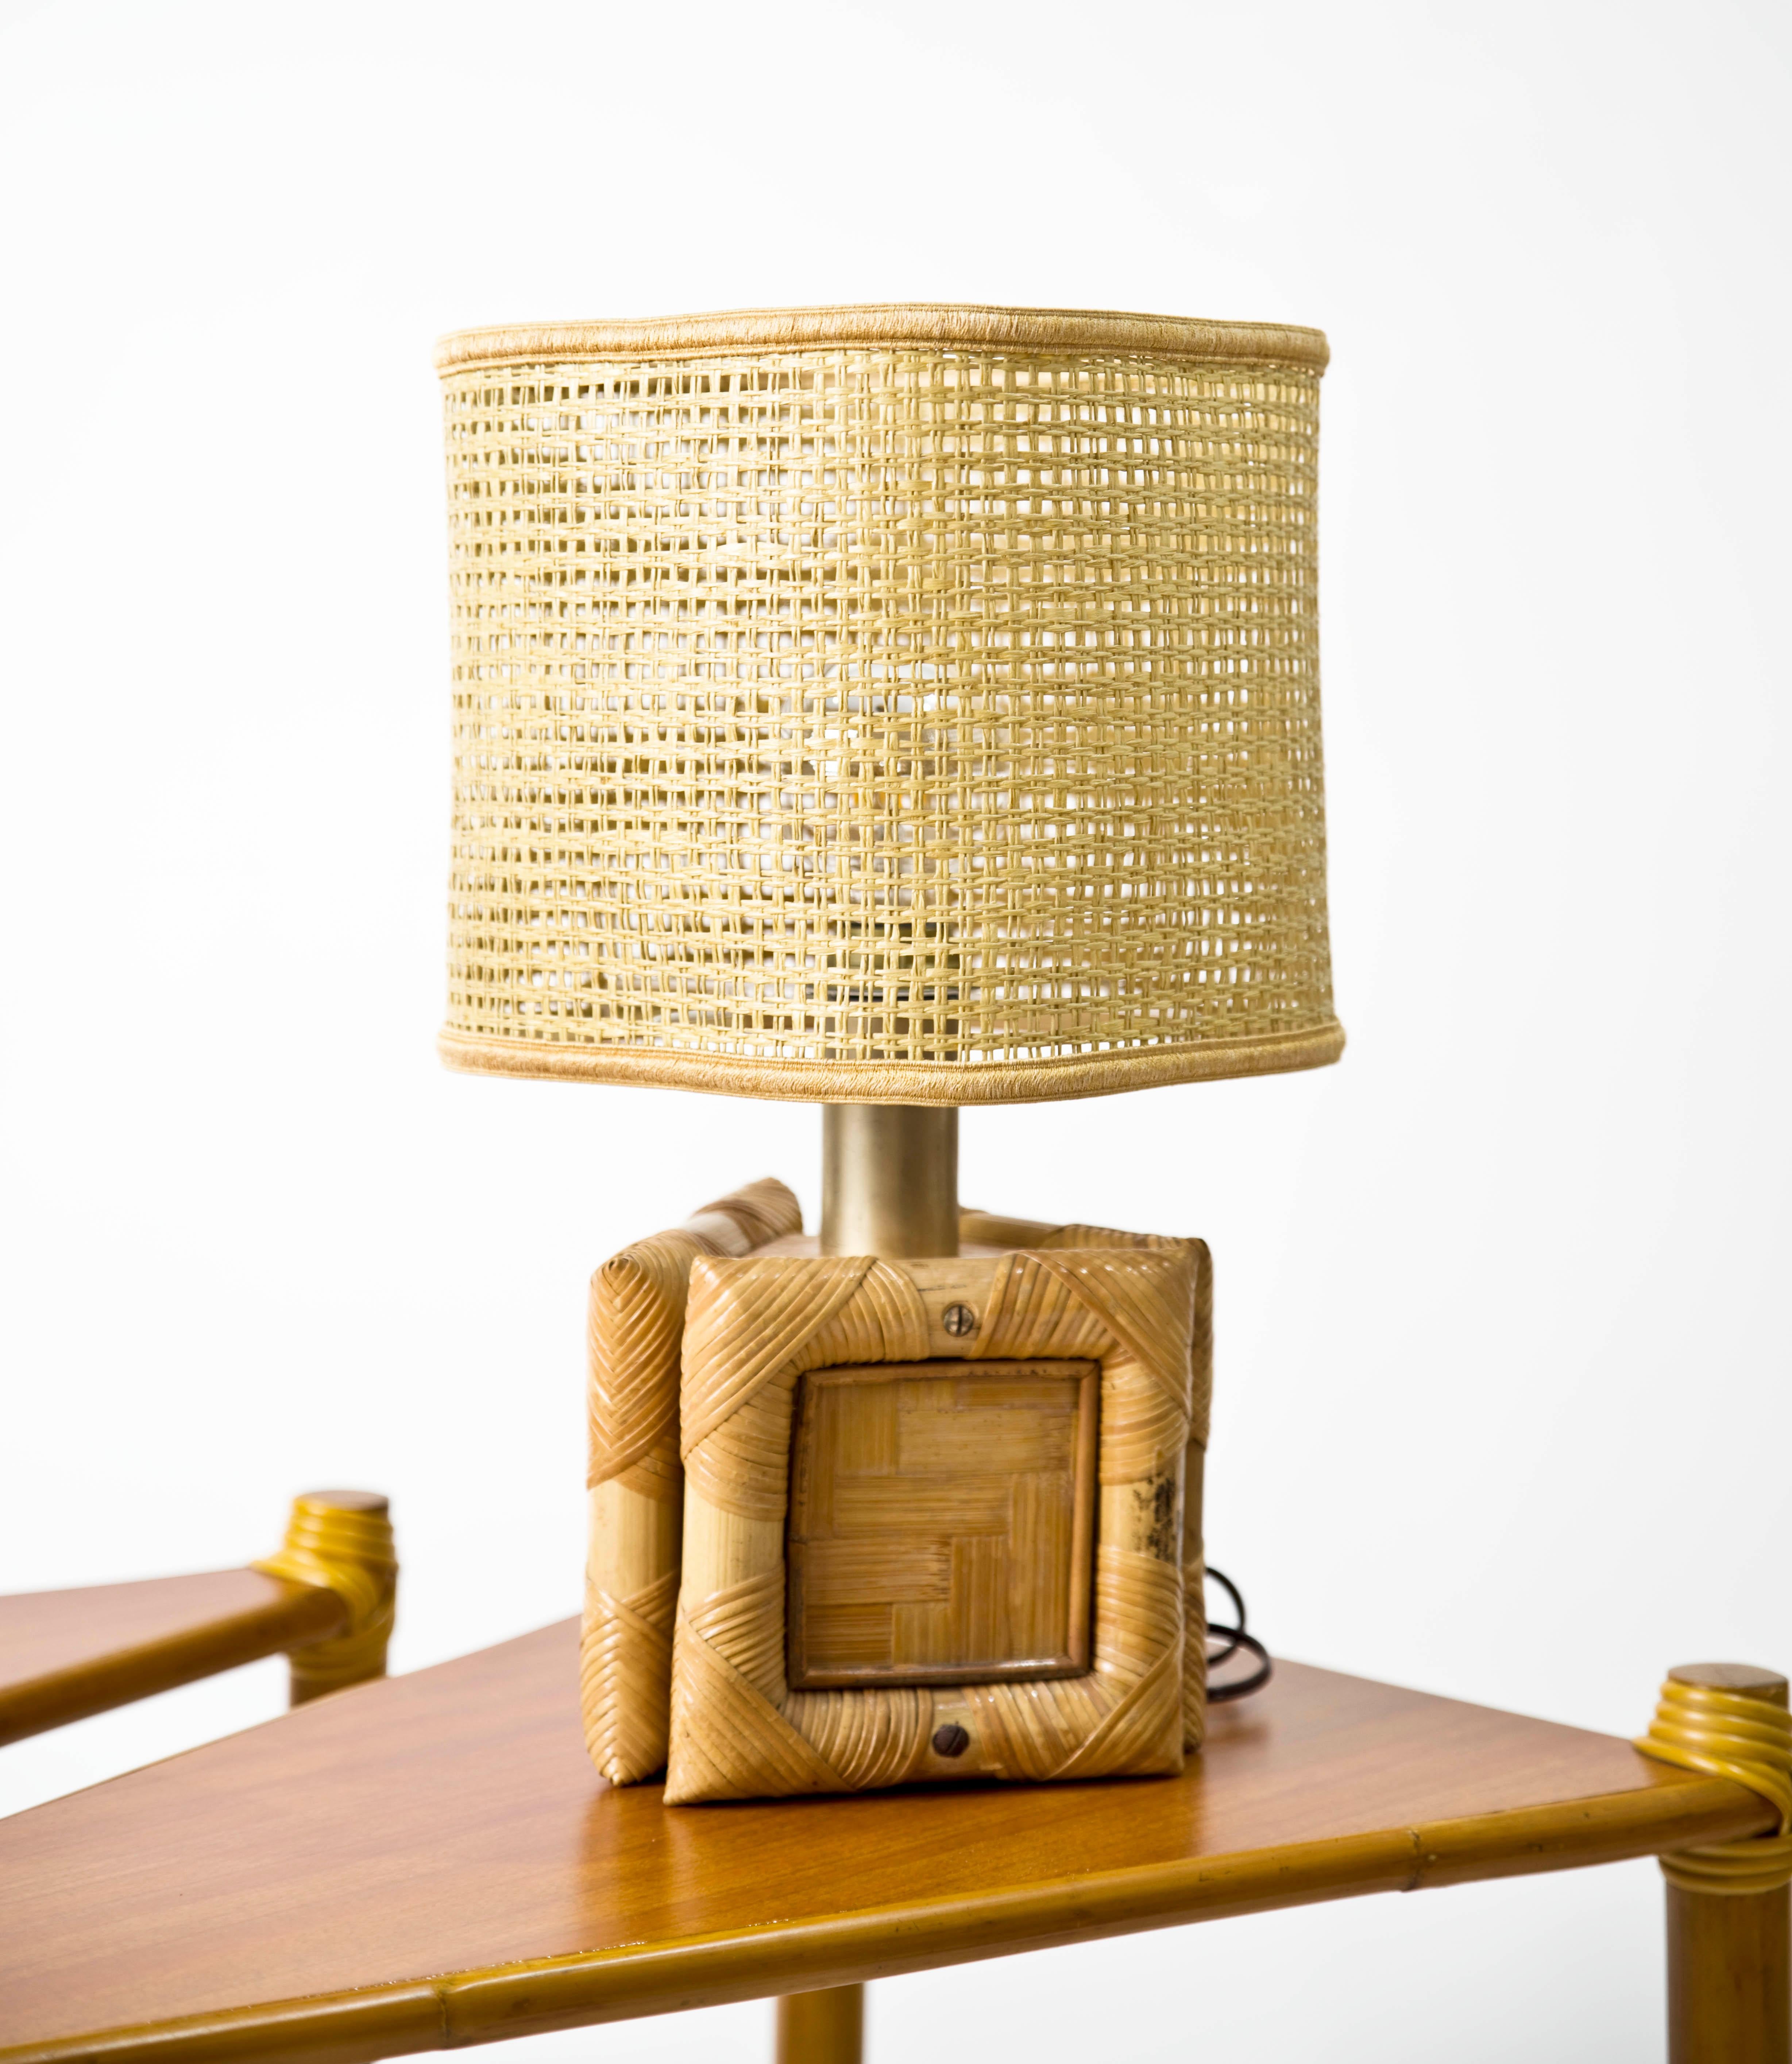 Pair of Italian table lamps circa 1970s bamboo, vienna straw. Good vintage condition.